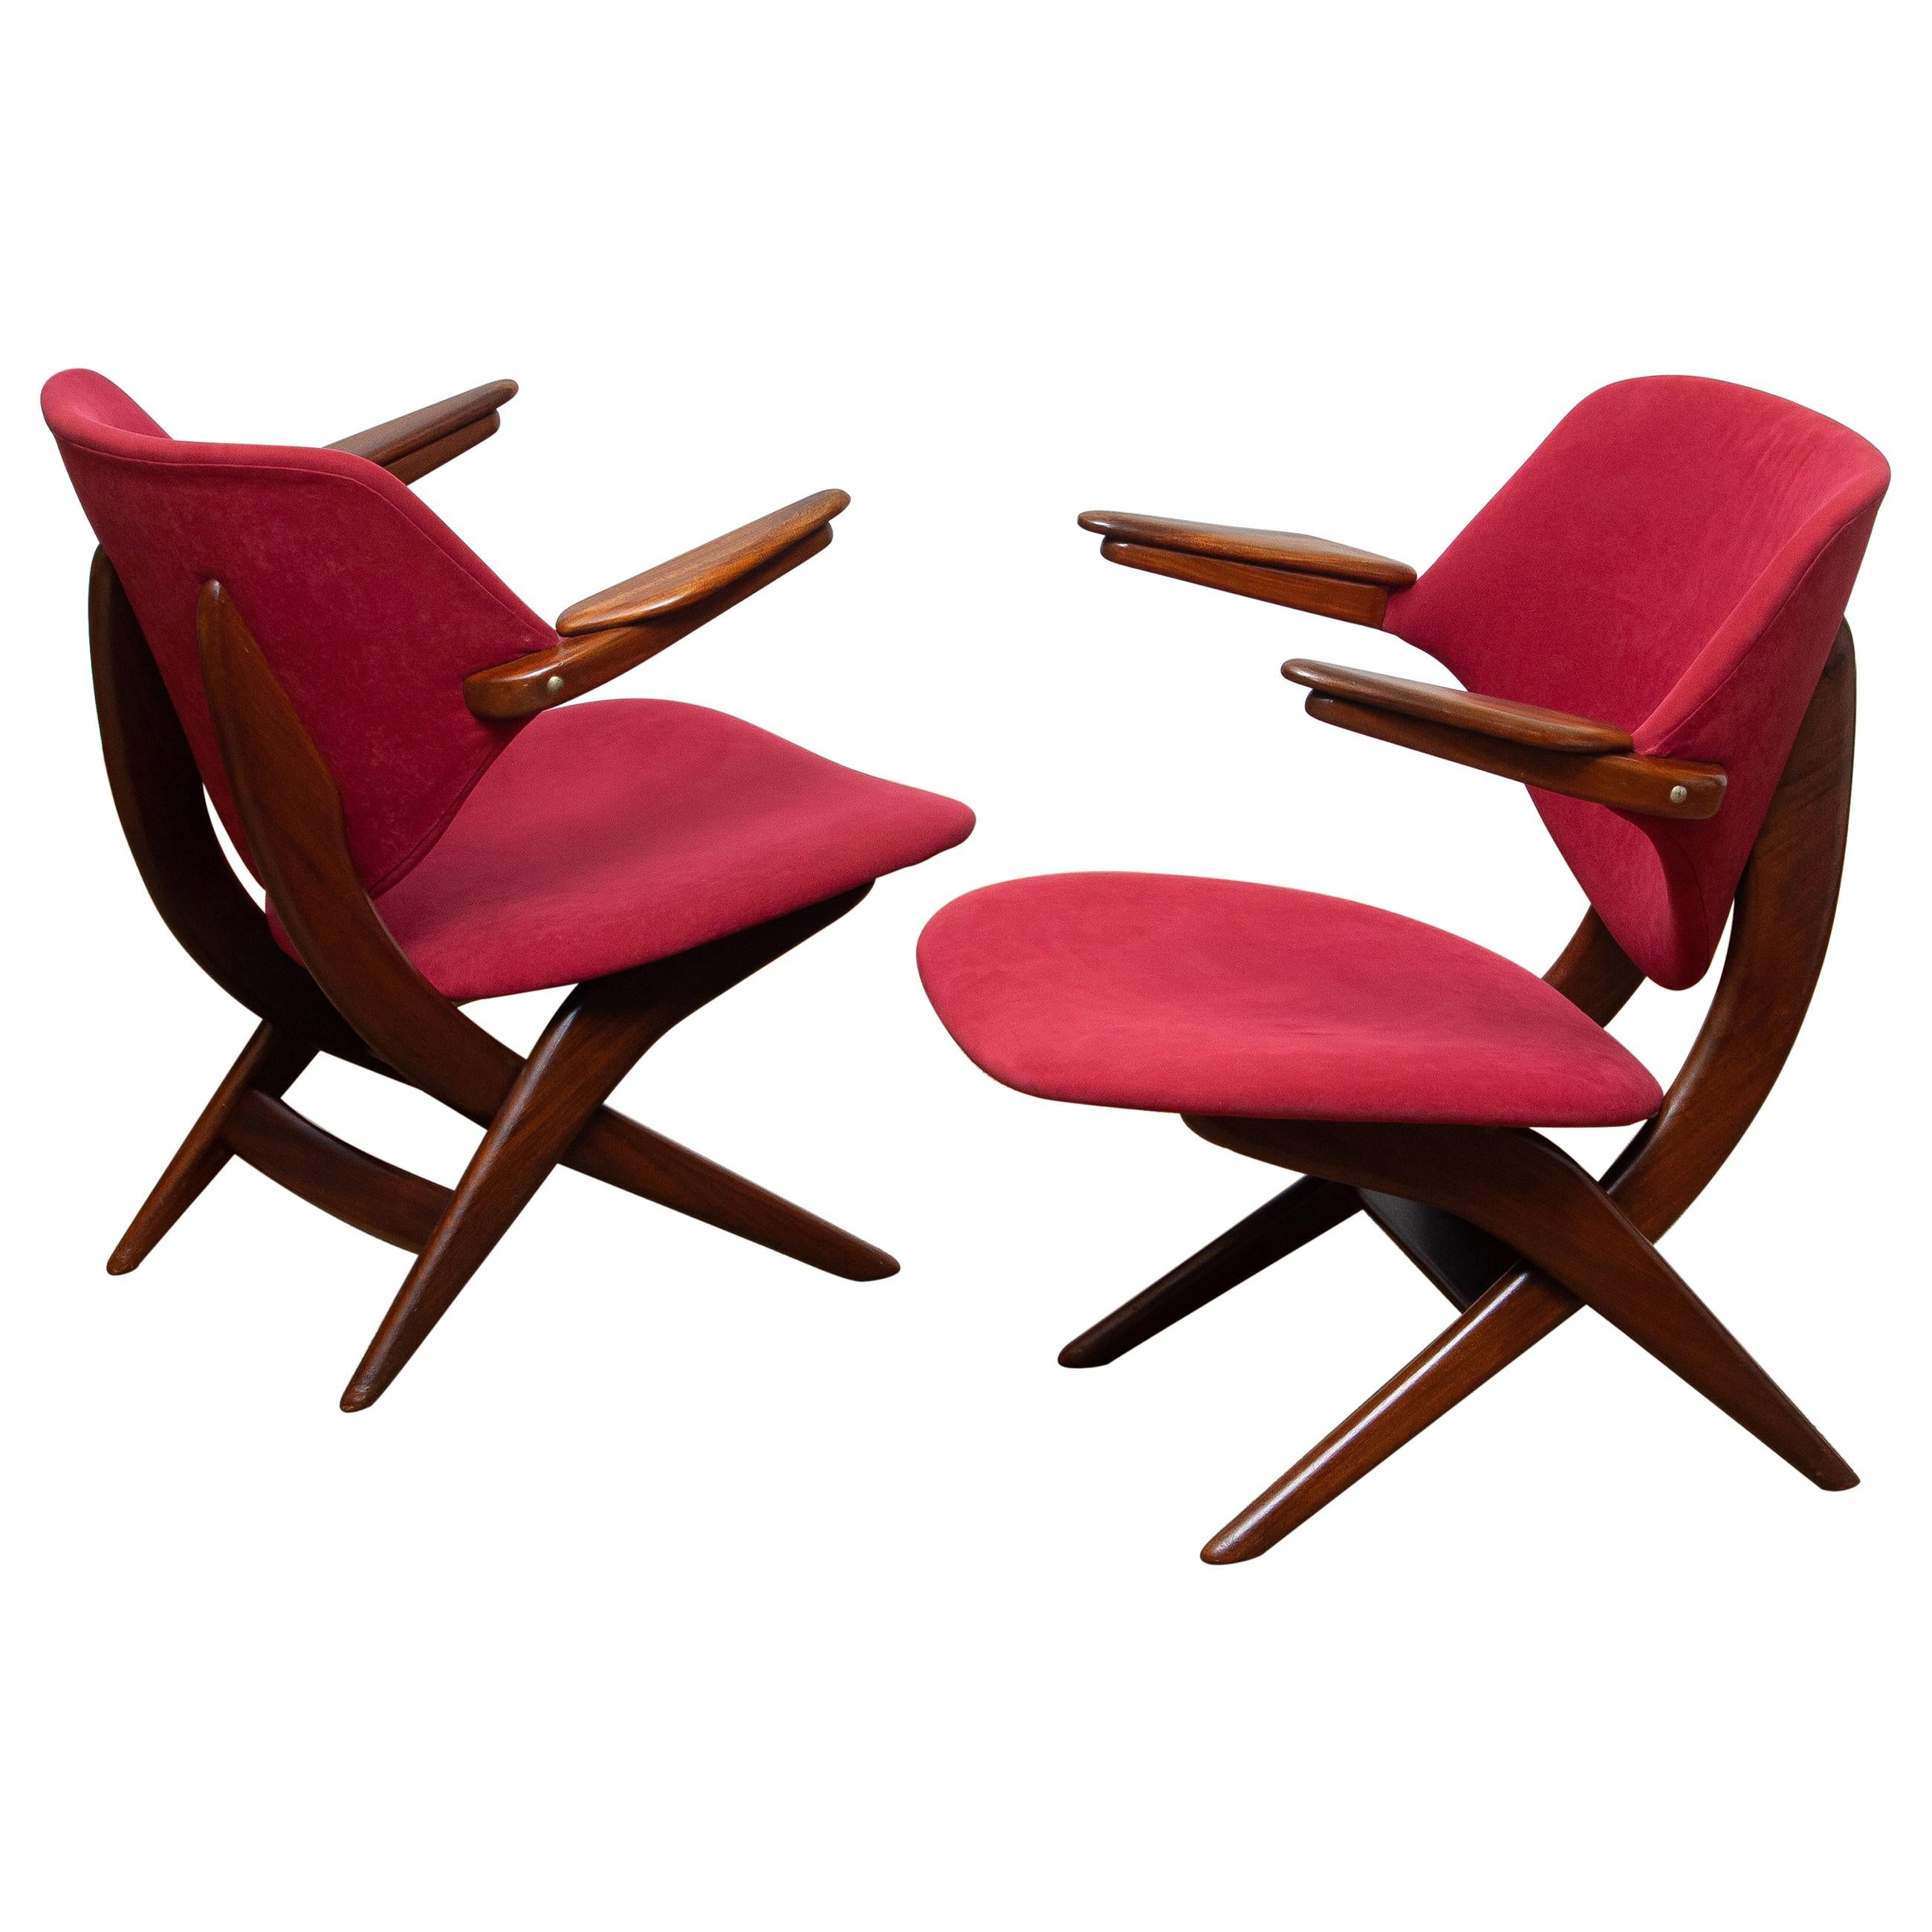 Mid-20th Century 1950s, Set of Two Teak Lounge/Easy Chairs by Louis Van Teeffelen for Wébé